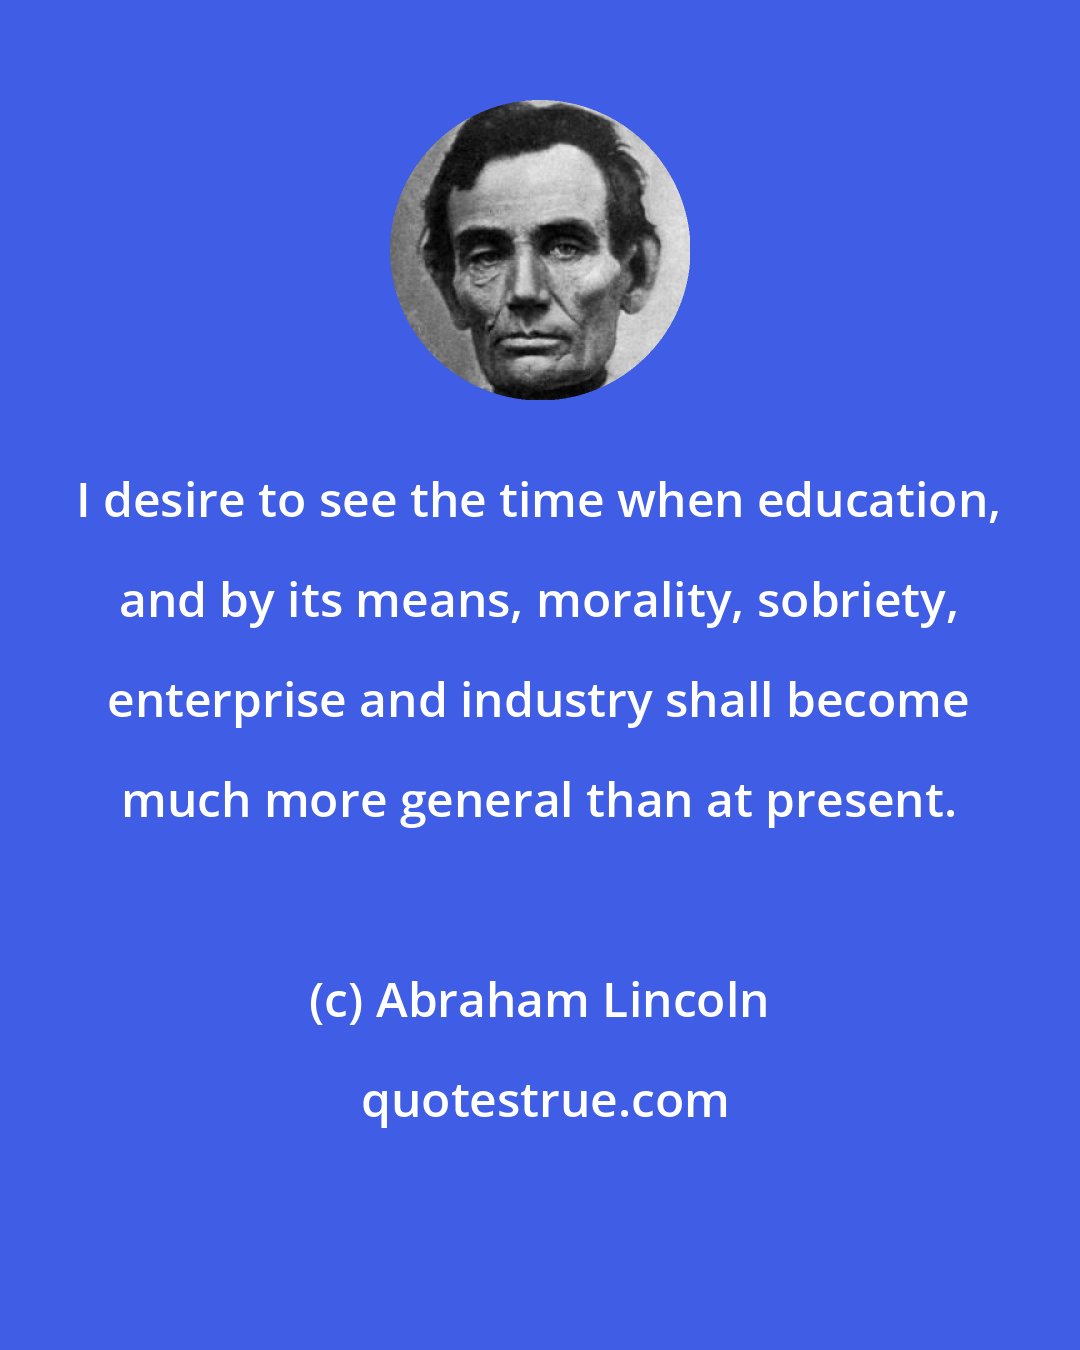 Abraham Lincoln: I desire to see the time when education, and by its means, morality, sobriety, enterprise and industry shall become much more general than at present.